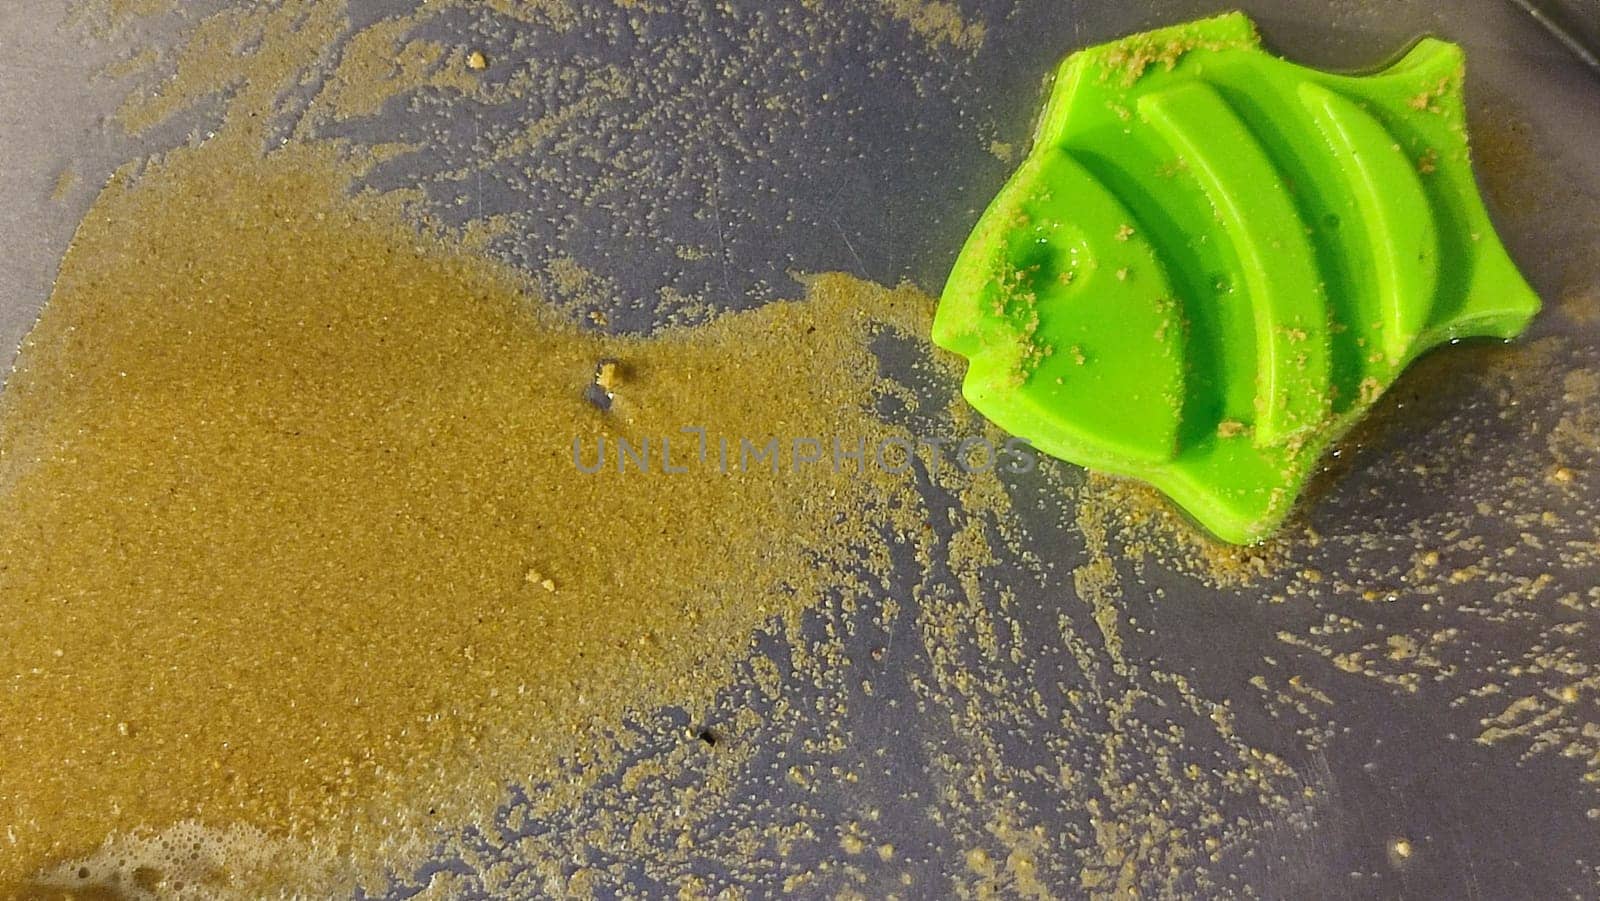 green plastic fish toy in the sand, children's toy, object, beach. High quality photo